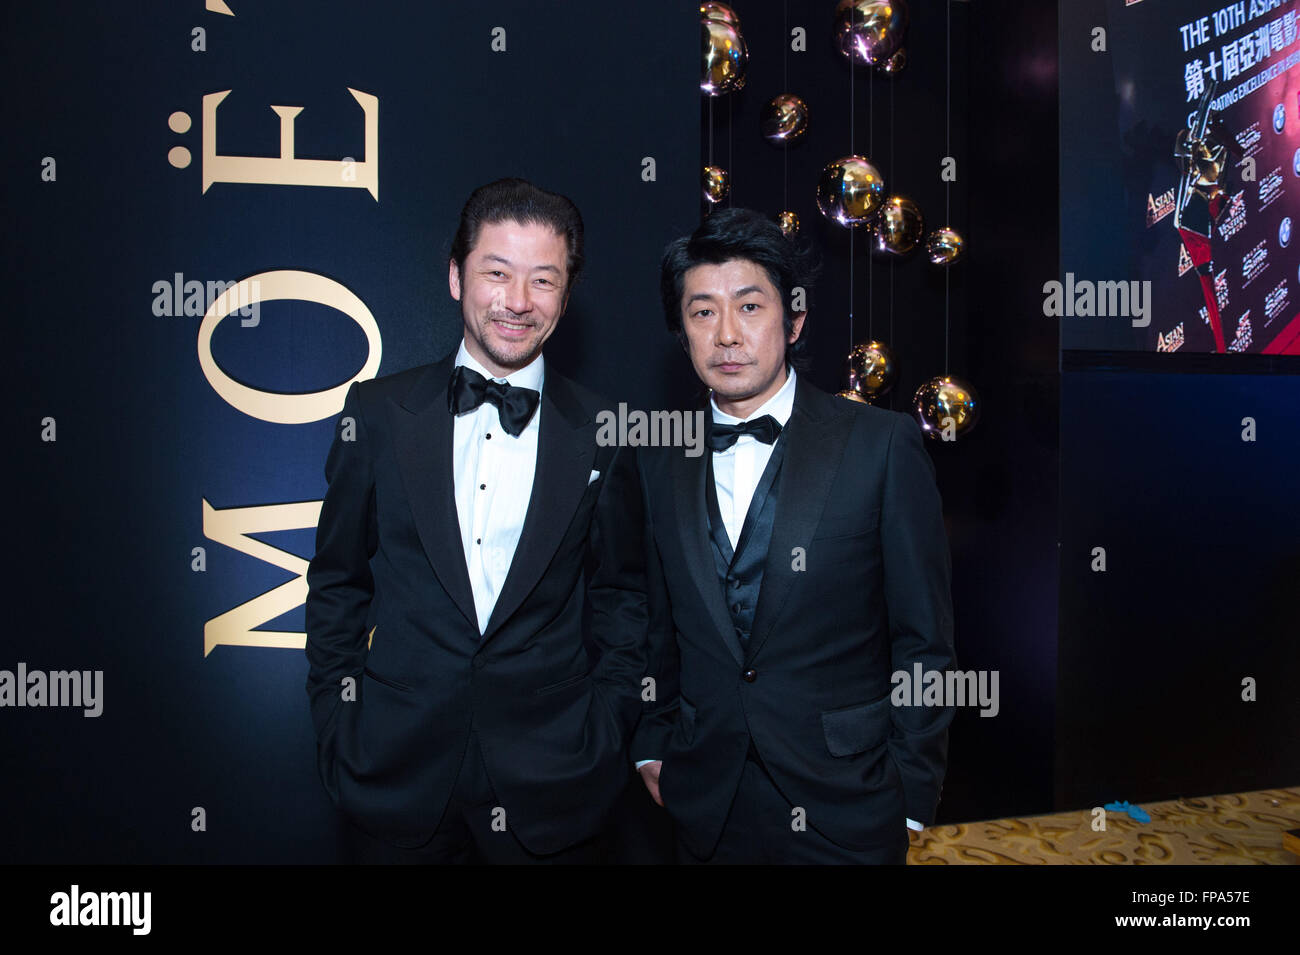 Hong Kong, Macau SAR, China. 17th Mar, 2016. L to R Japanese actor Masatoshi Nagase nominated for best actor and Japanese actor Tadanobu Asano who won best supporting actor prize for 'Journey to the Shore' in the Moet drinks room at the 10th Asian Film awards press conference Venetian Hotel Macau © Jayne Russell/ZUMA Wire/Alamy Live News Stock Photo